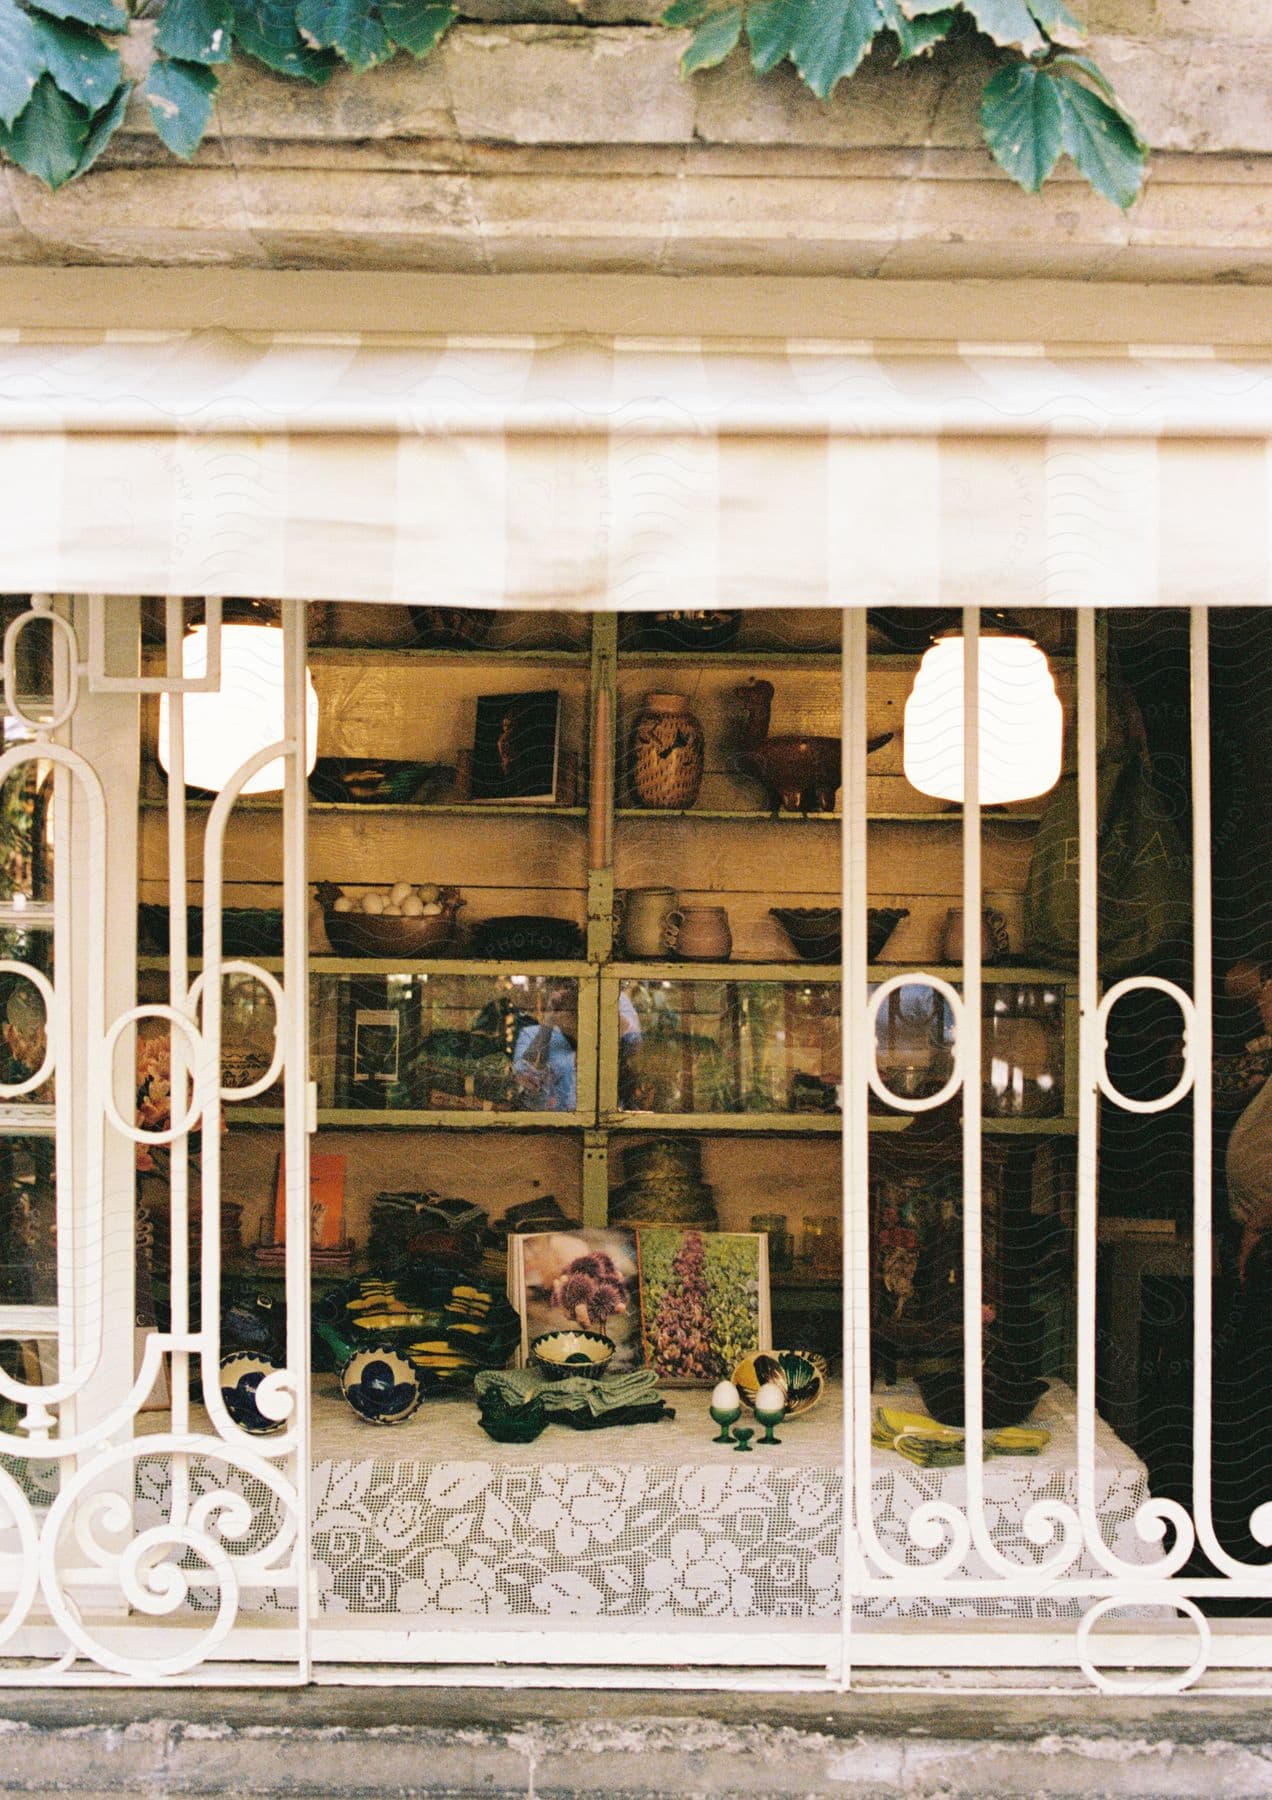 Stock photo of window shop on a store next to the sidewalk with the reflection in the window glass a person taking a photograph during day time